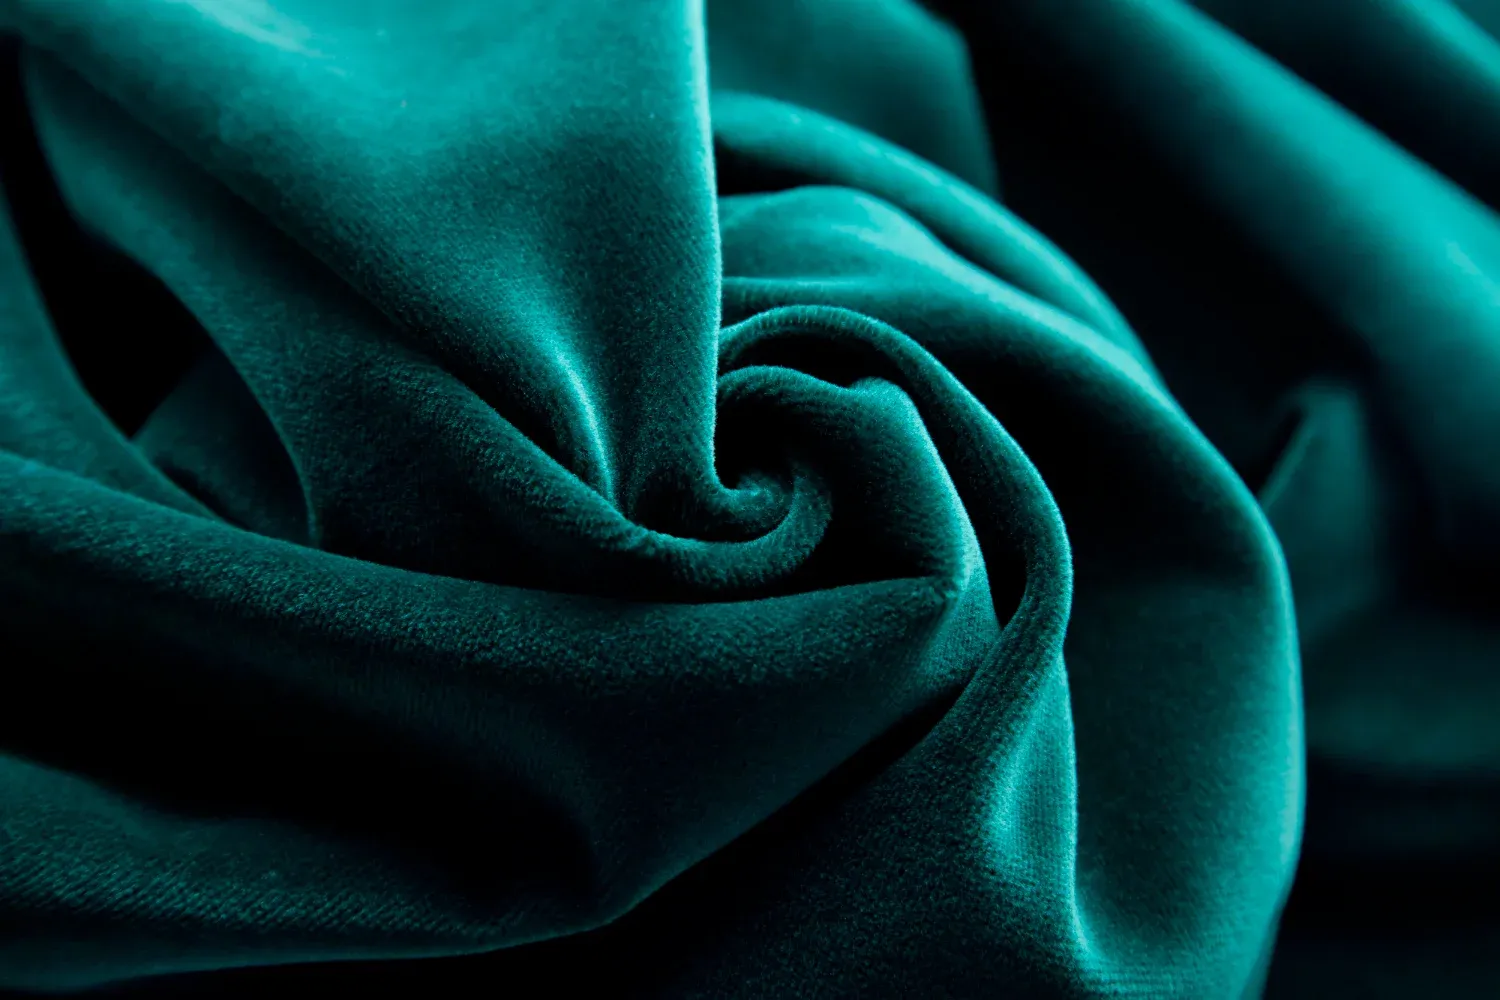 A close up of a teal velvet fabric.